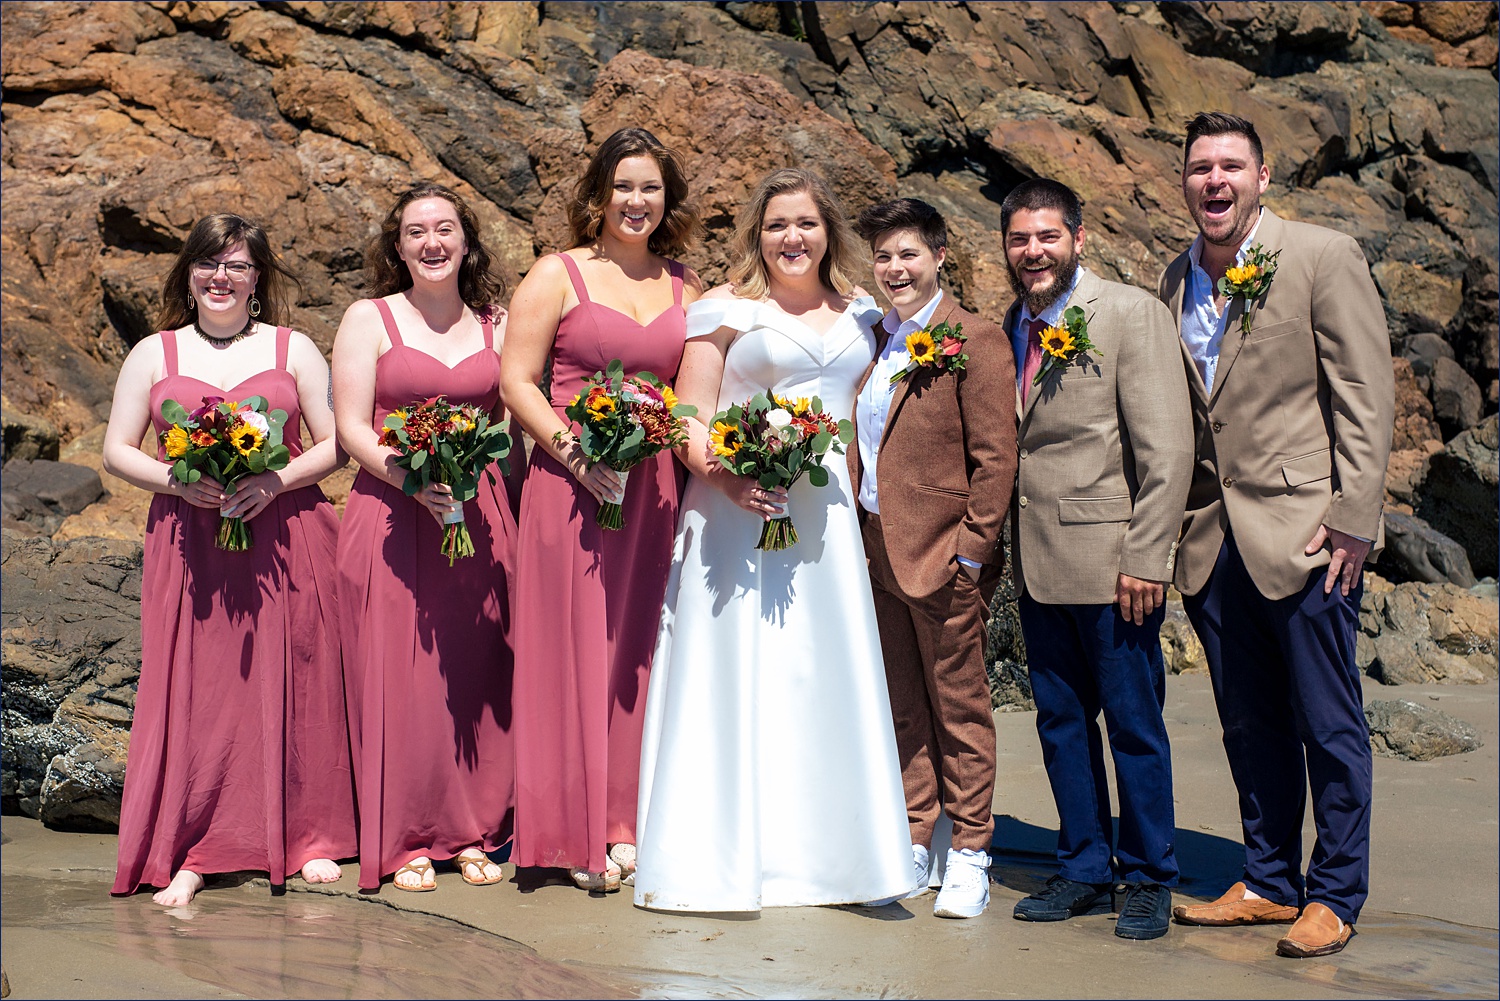 The wedding party poses for a photo on the beaches of Ogunquit Maine